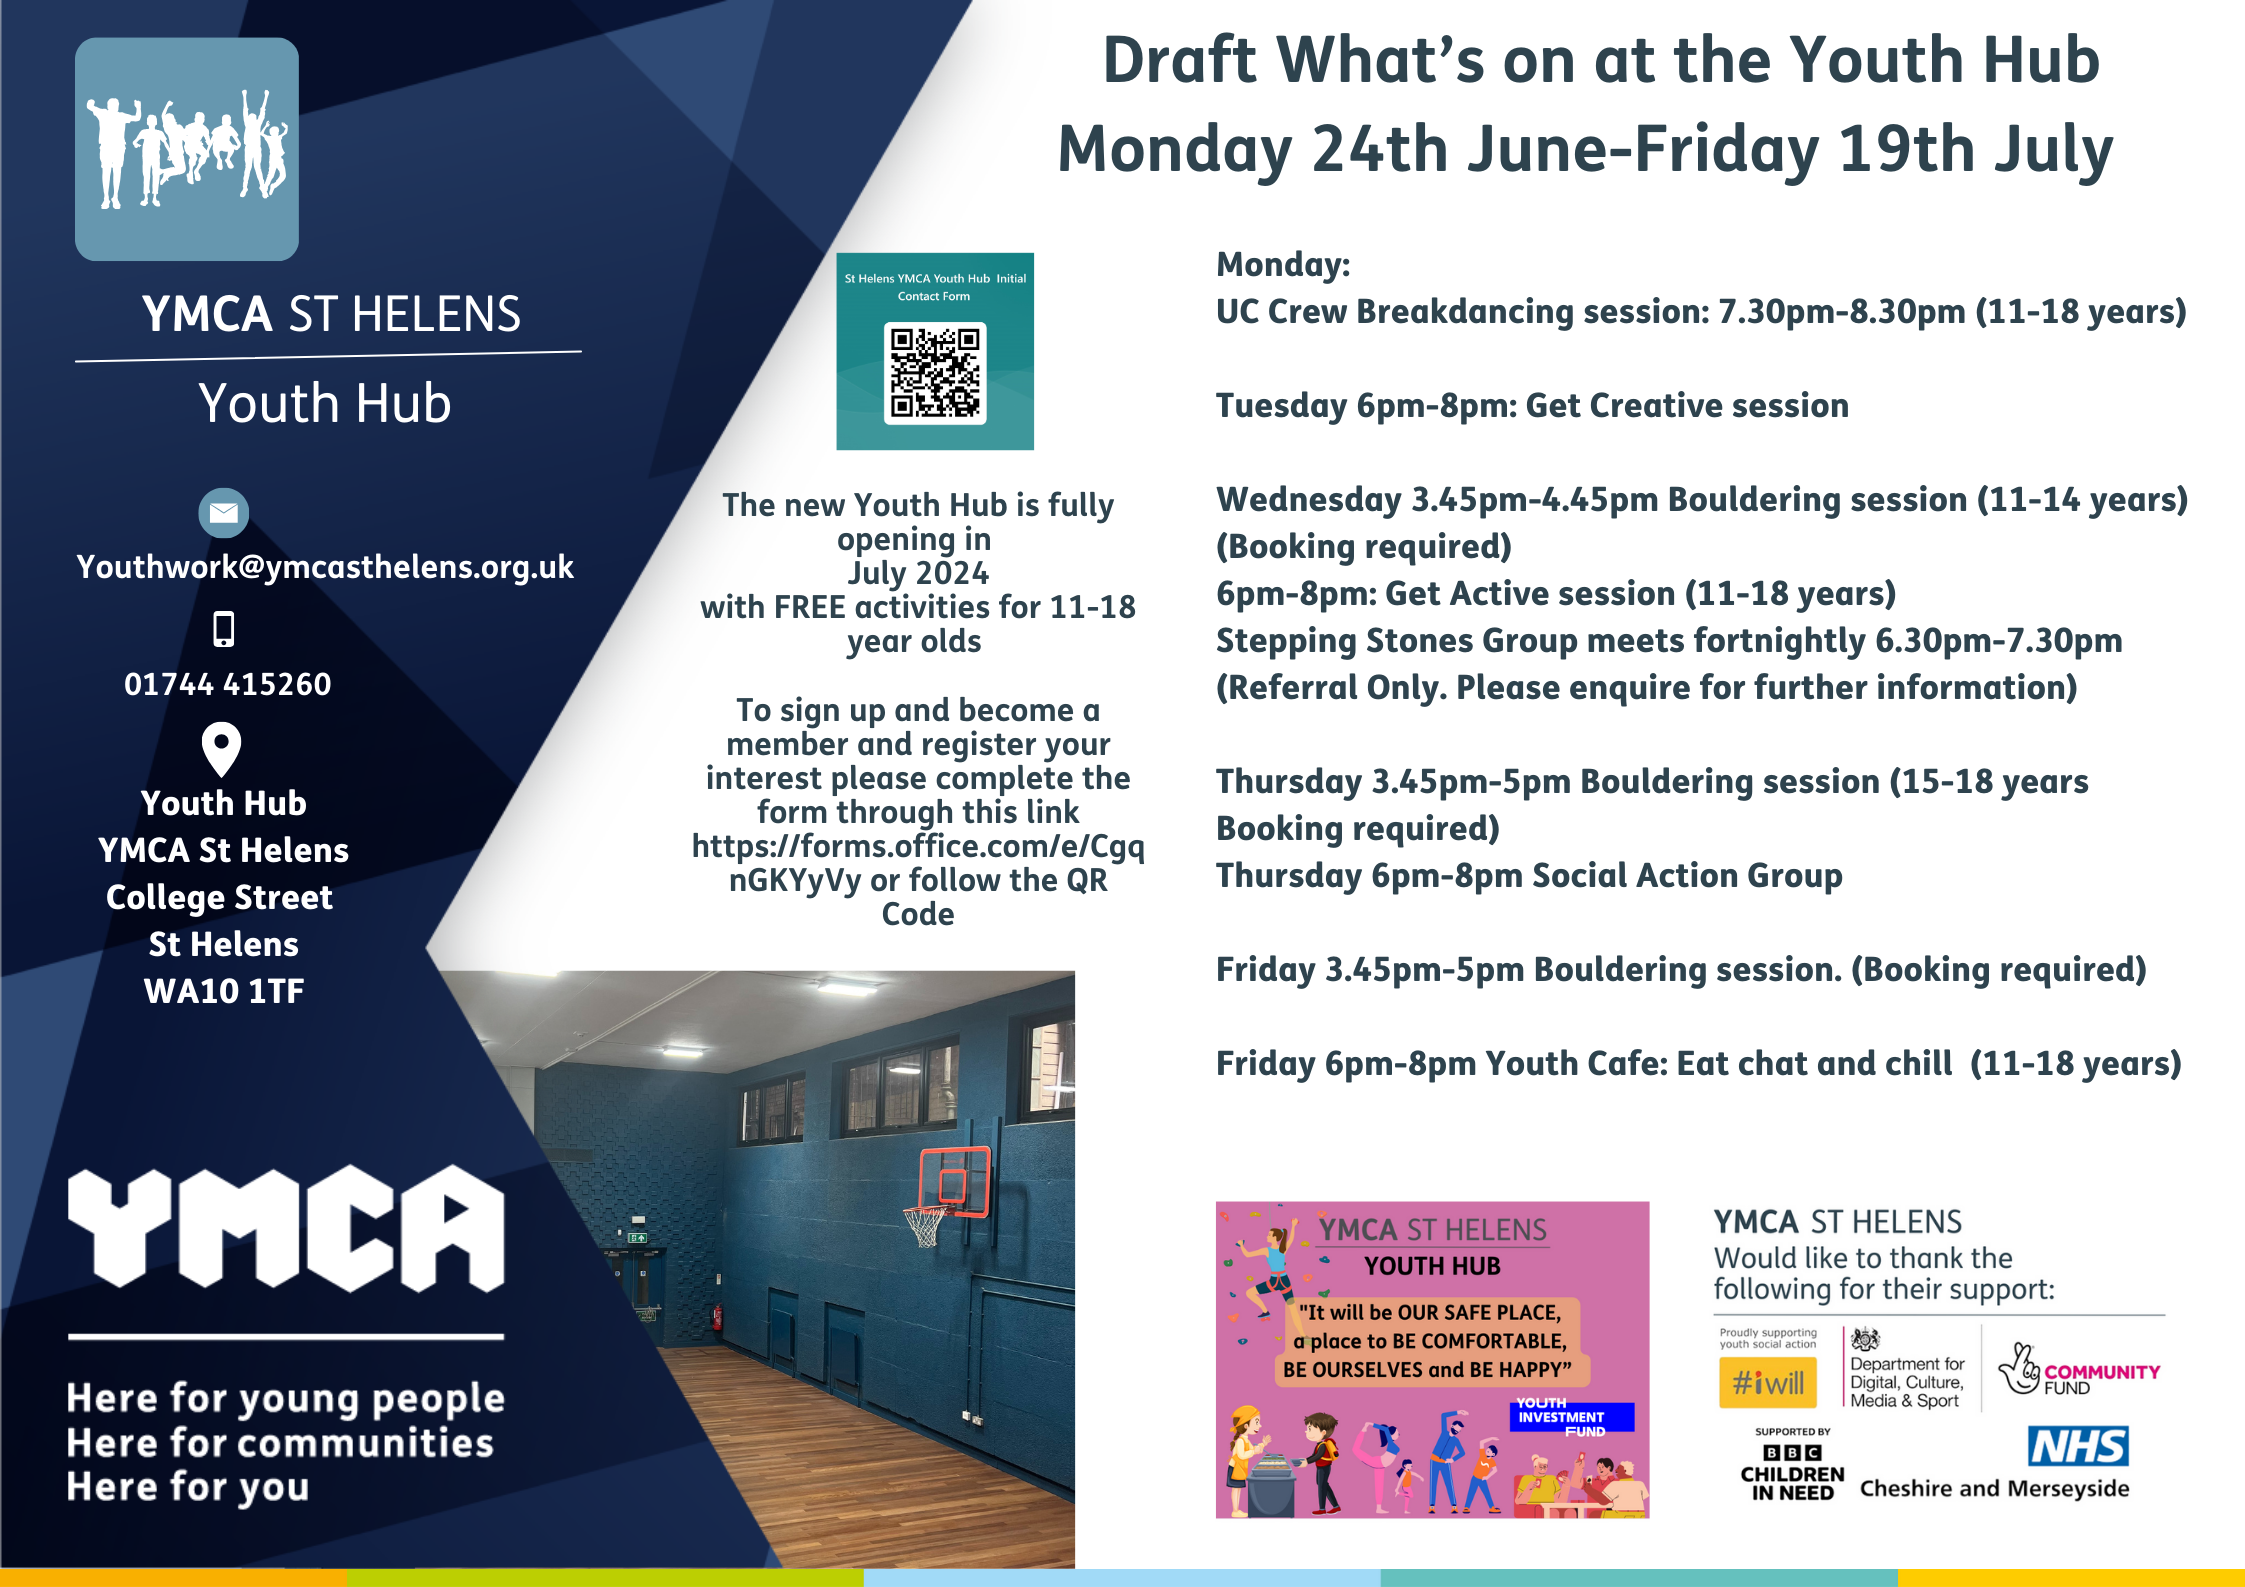 What's on at the youth hub until 19th July